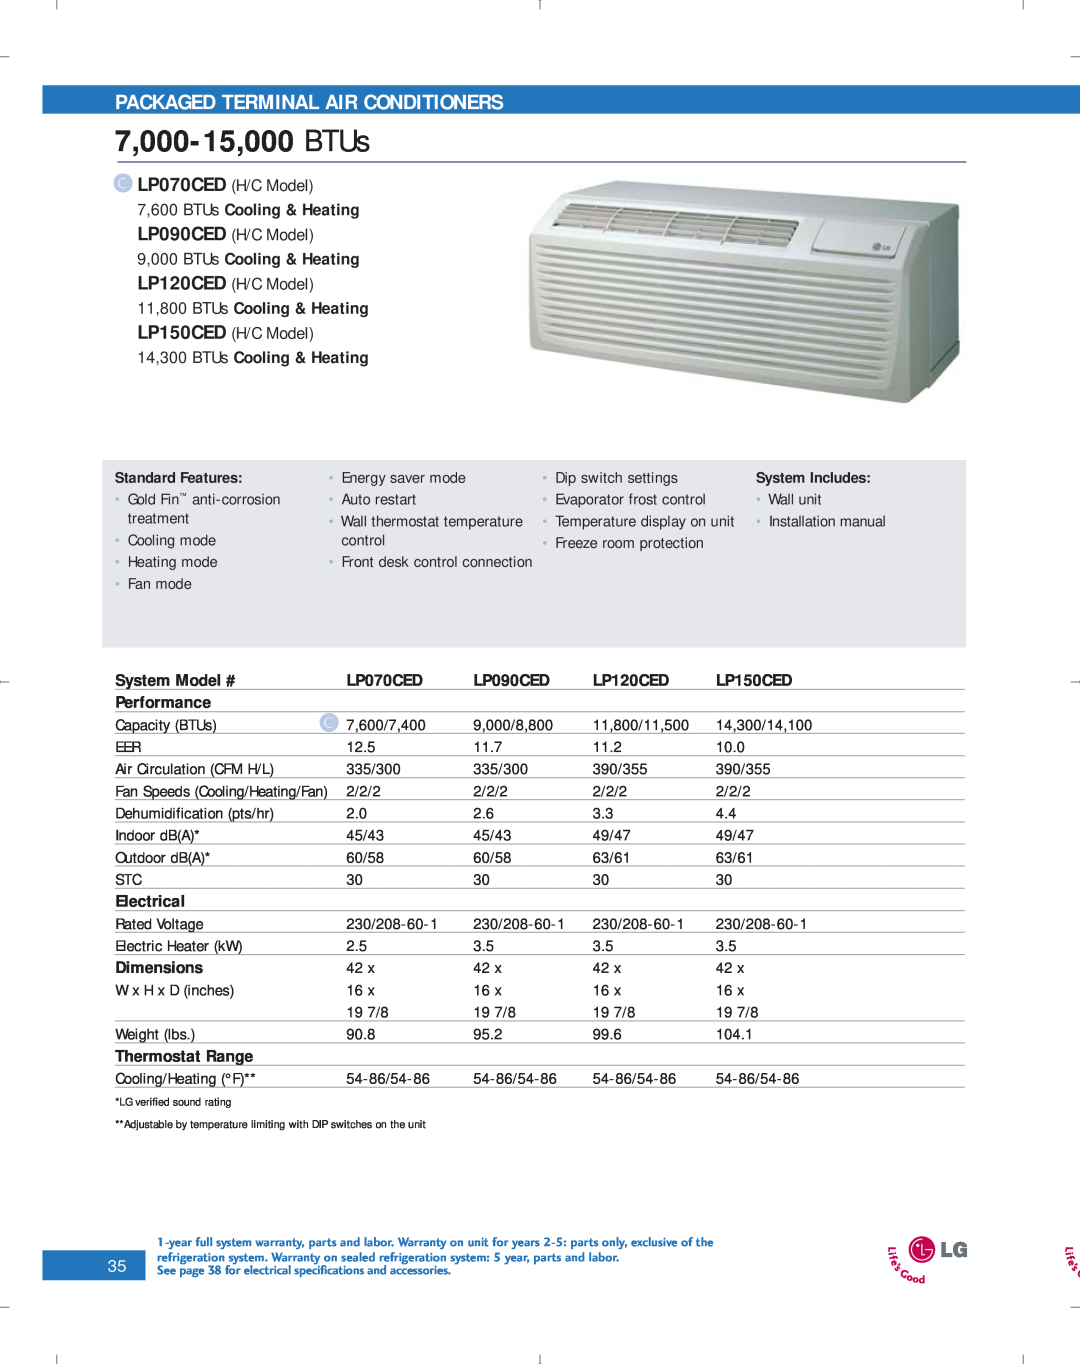 LG Electronics PG-100-2006-VER3 manual 7,000-15,000 BTUs, Packaged Terminal Air Conditioners, 7,600 BTUs Cooling & Heating 